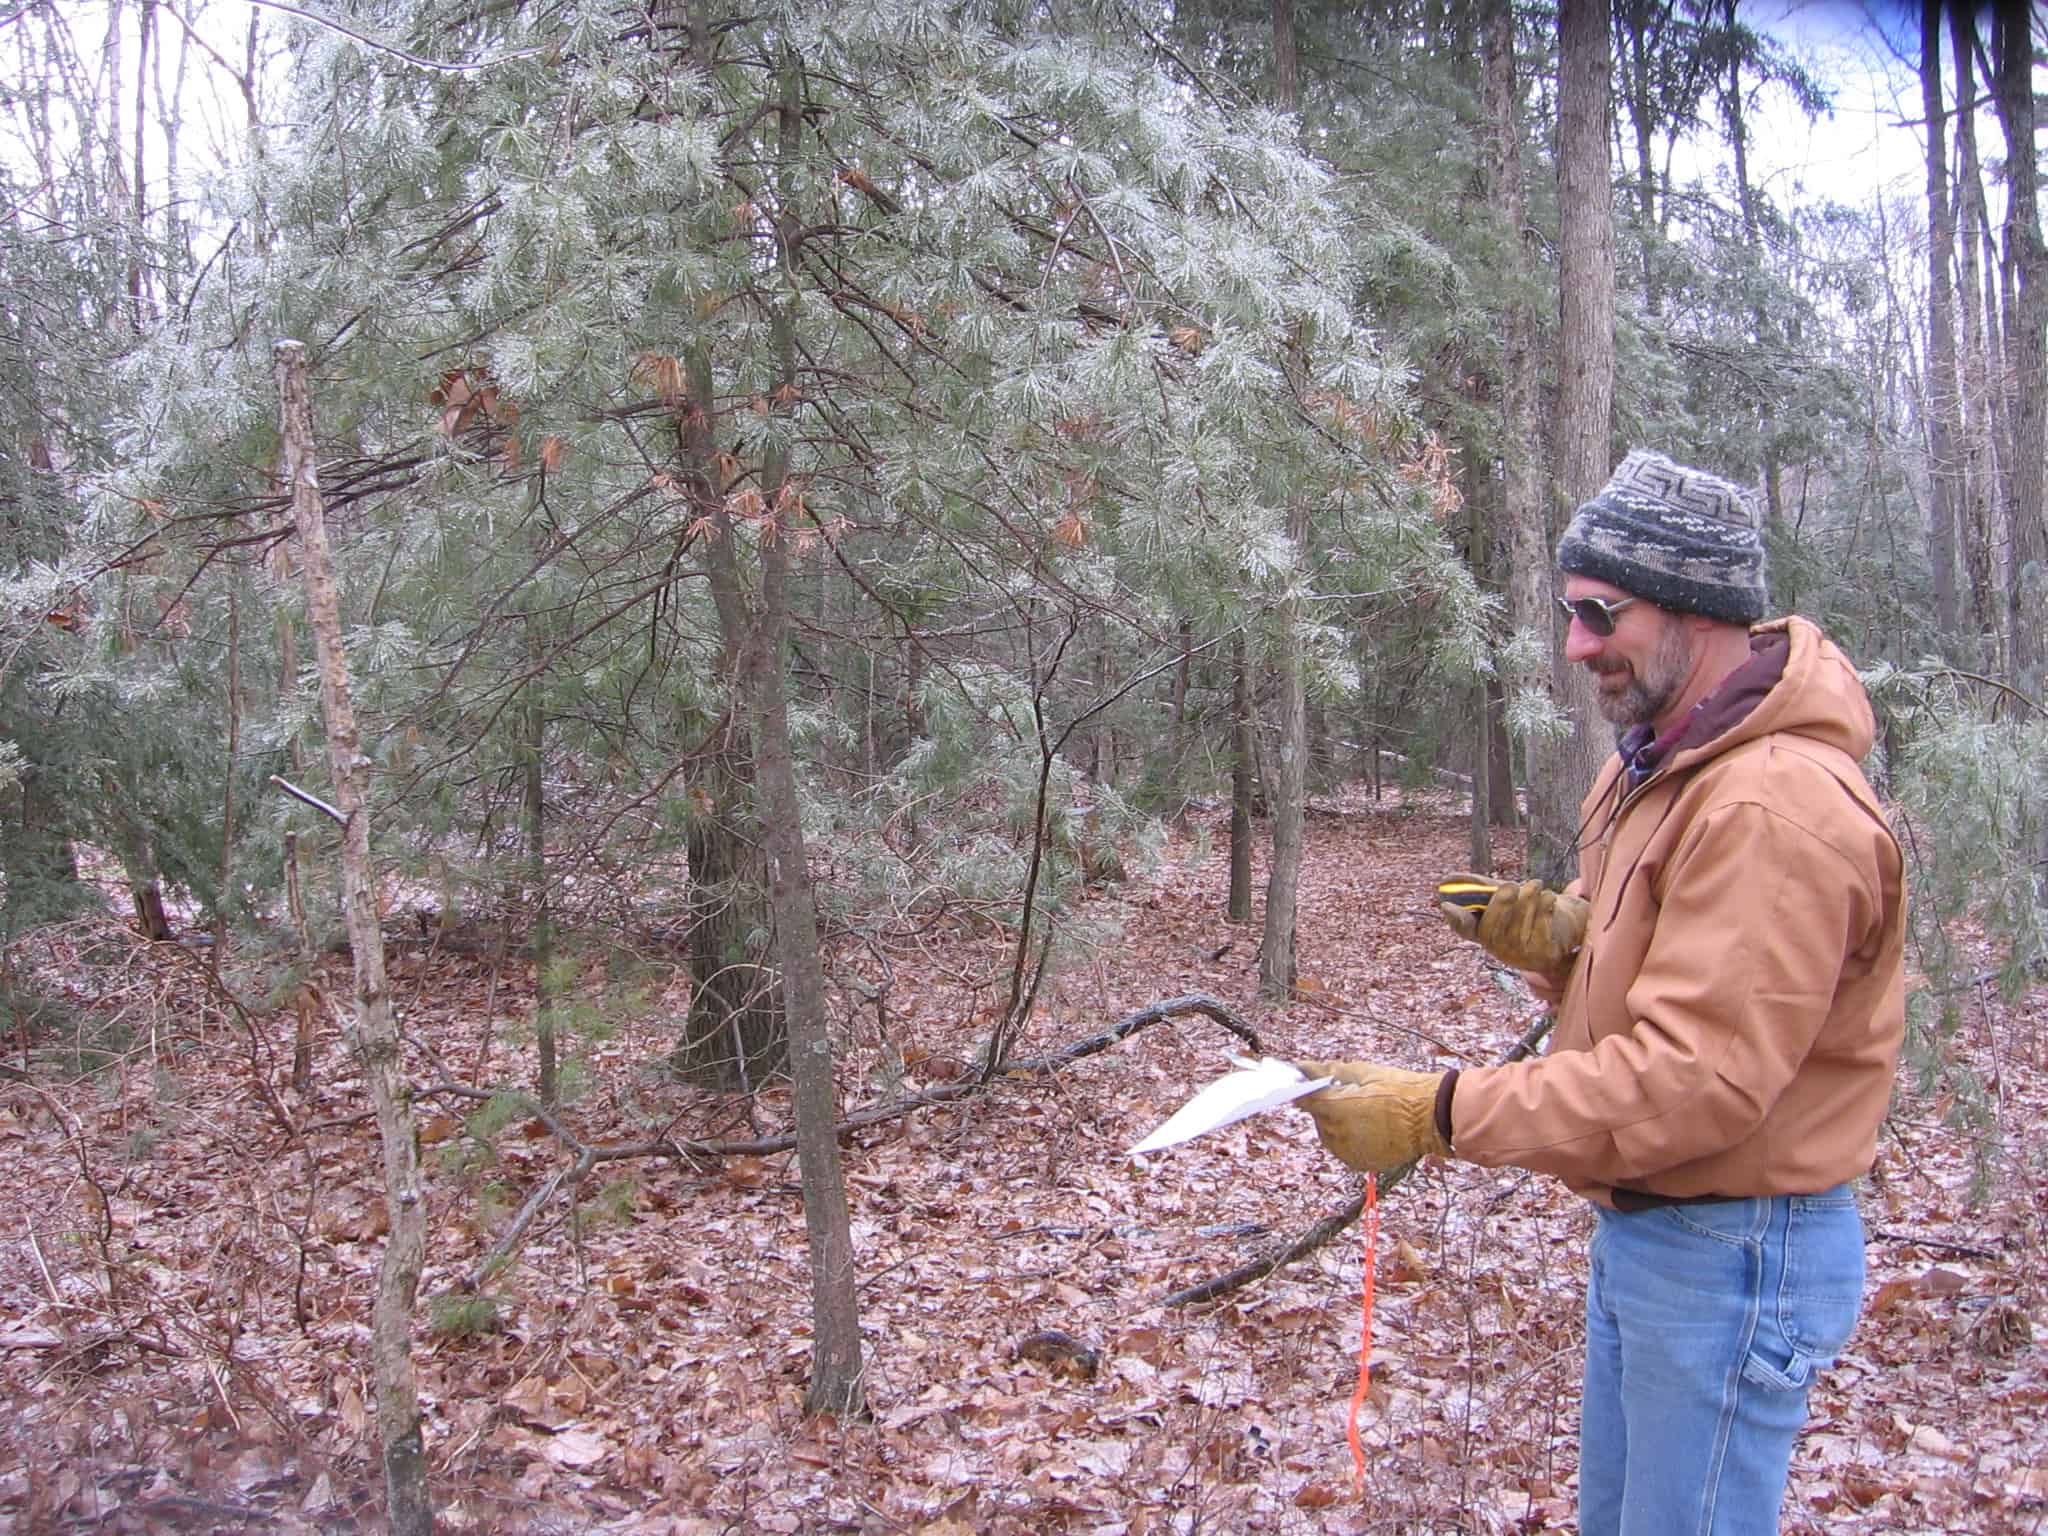 TIm Burris monitoring a conservation easement in the woods